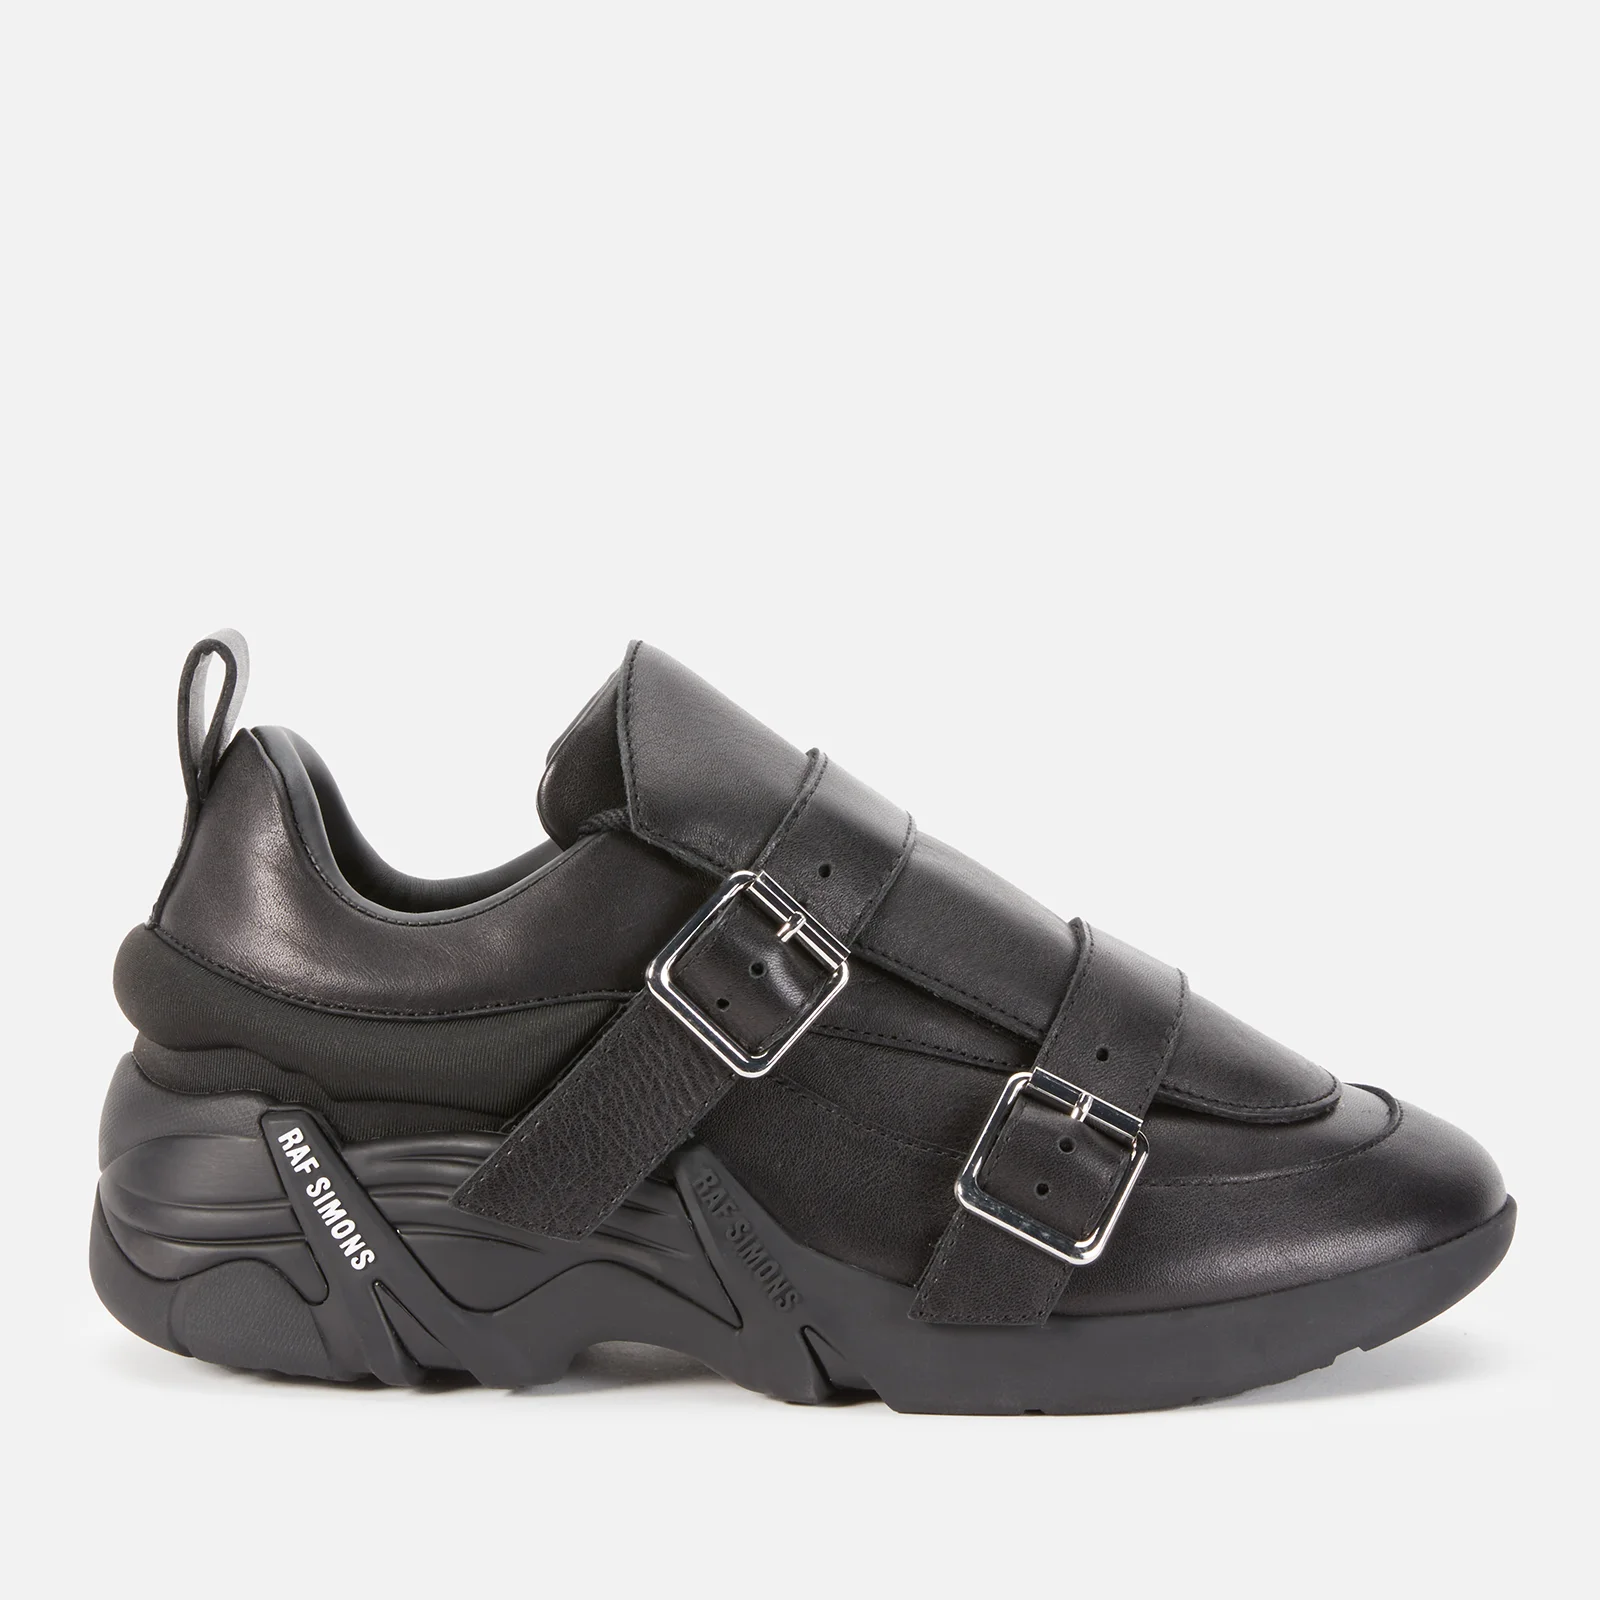 Raf Simmons Men's Antei-22 Leather Trainers - Black Image 1